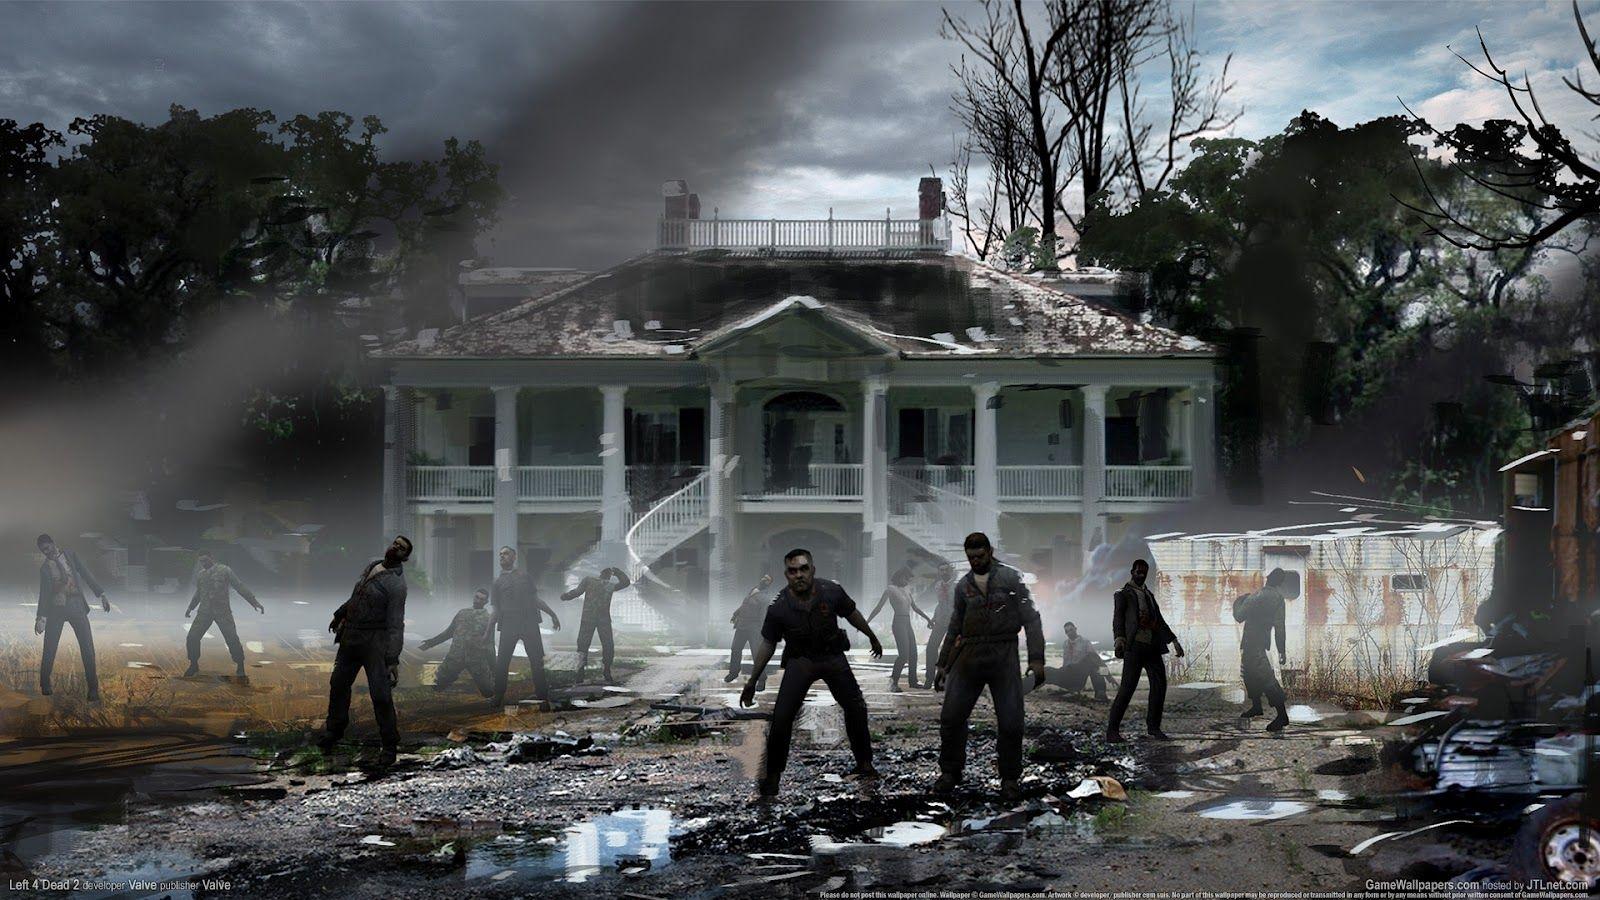 Wallpaper a day: zombie attack house end of world apocalypse wallpaper